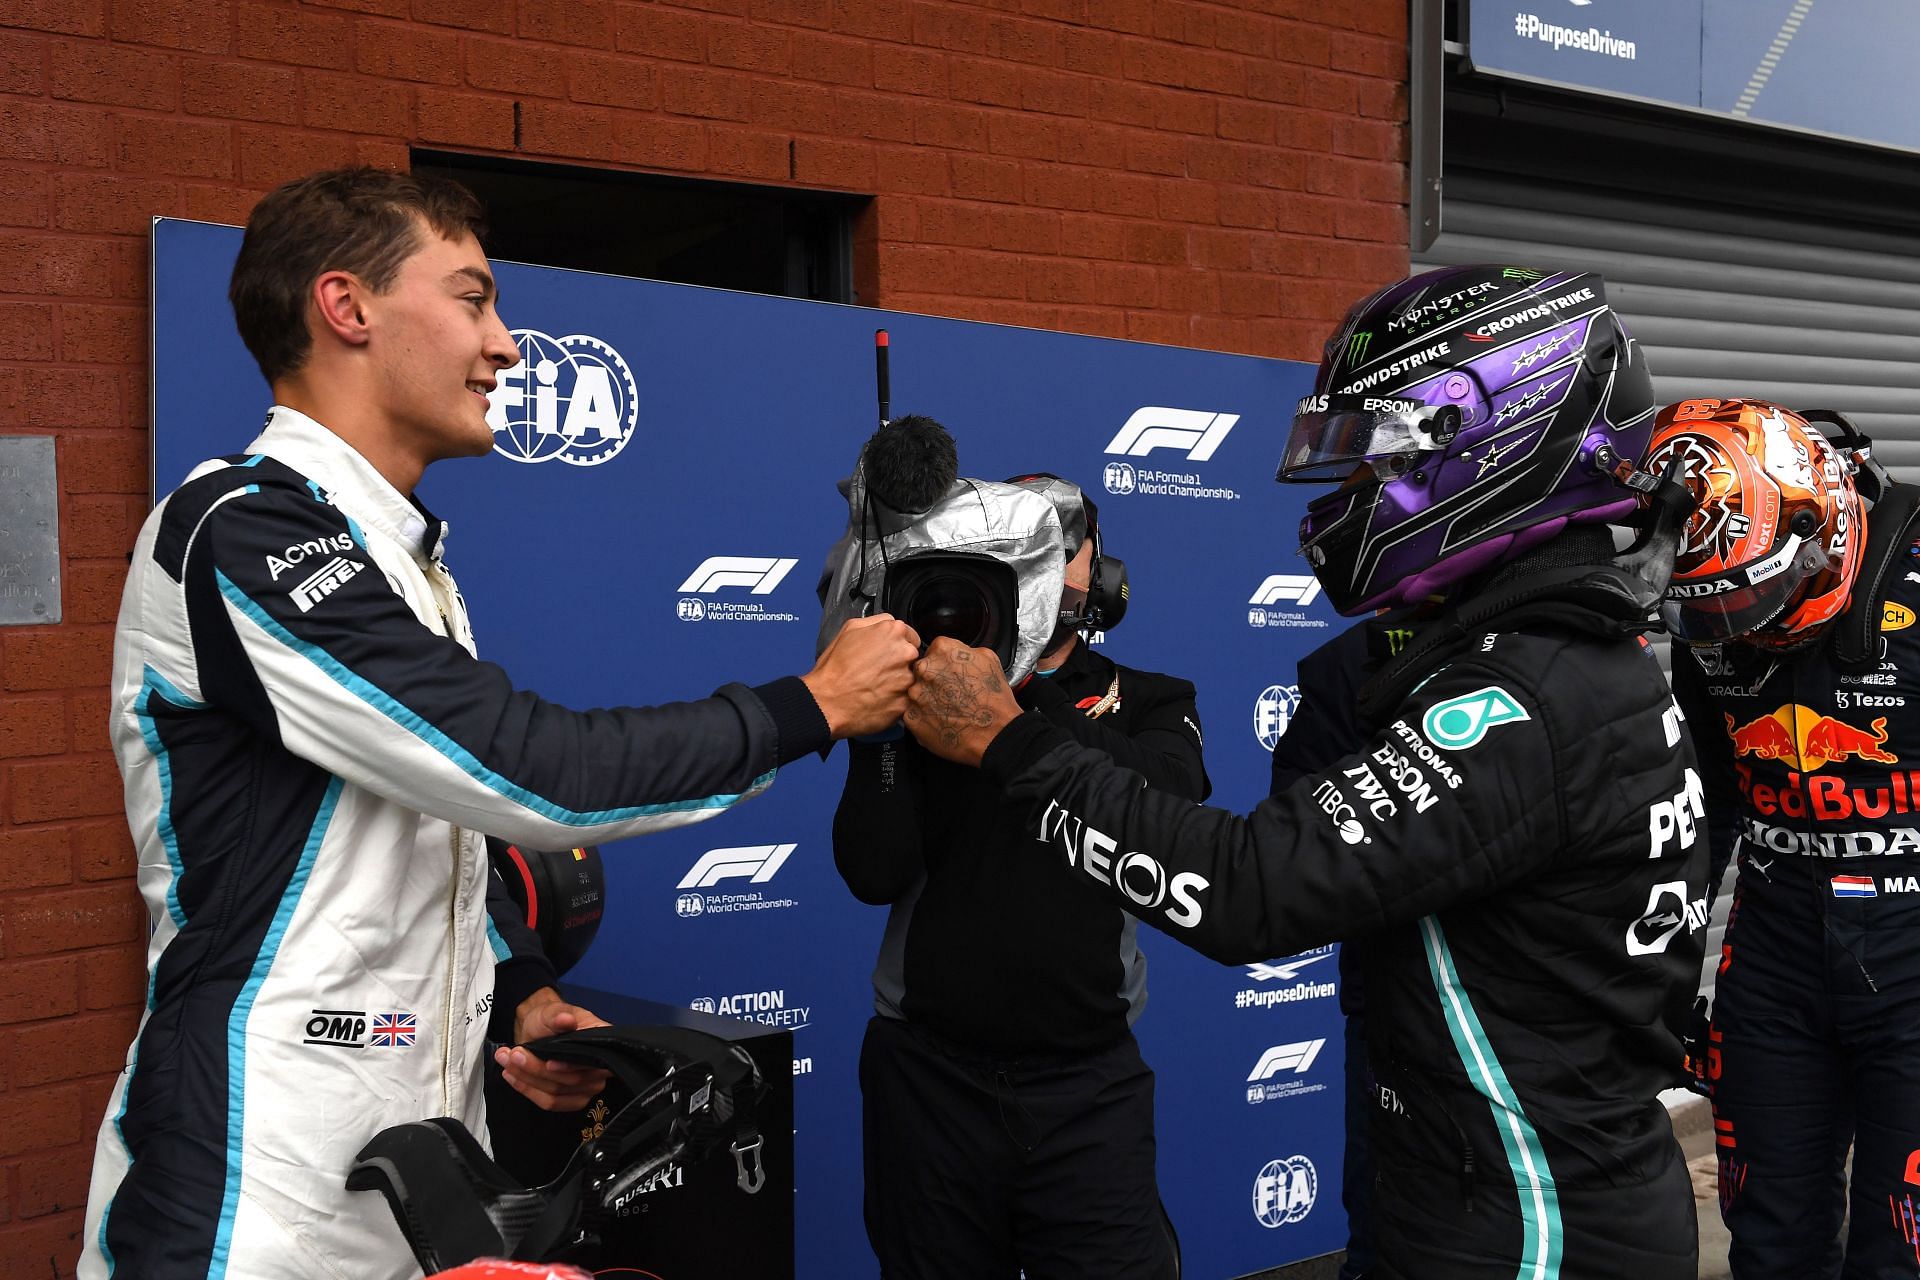 F1 Grand Prix of Belgium - George Russell (left) congratulated by his future teammate (Photo by John Thys - Pool/Getty Images)